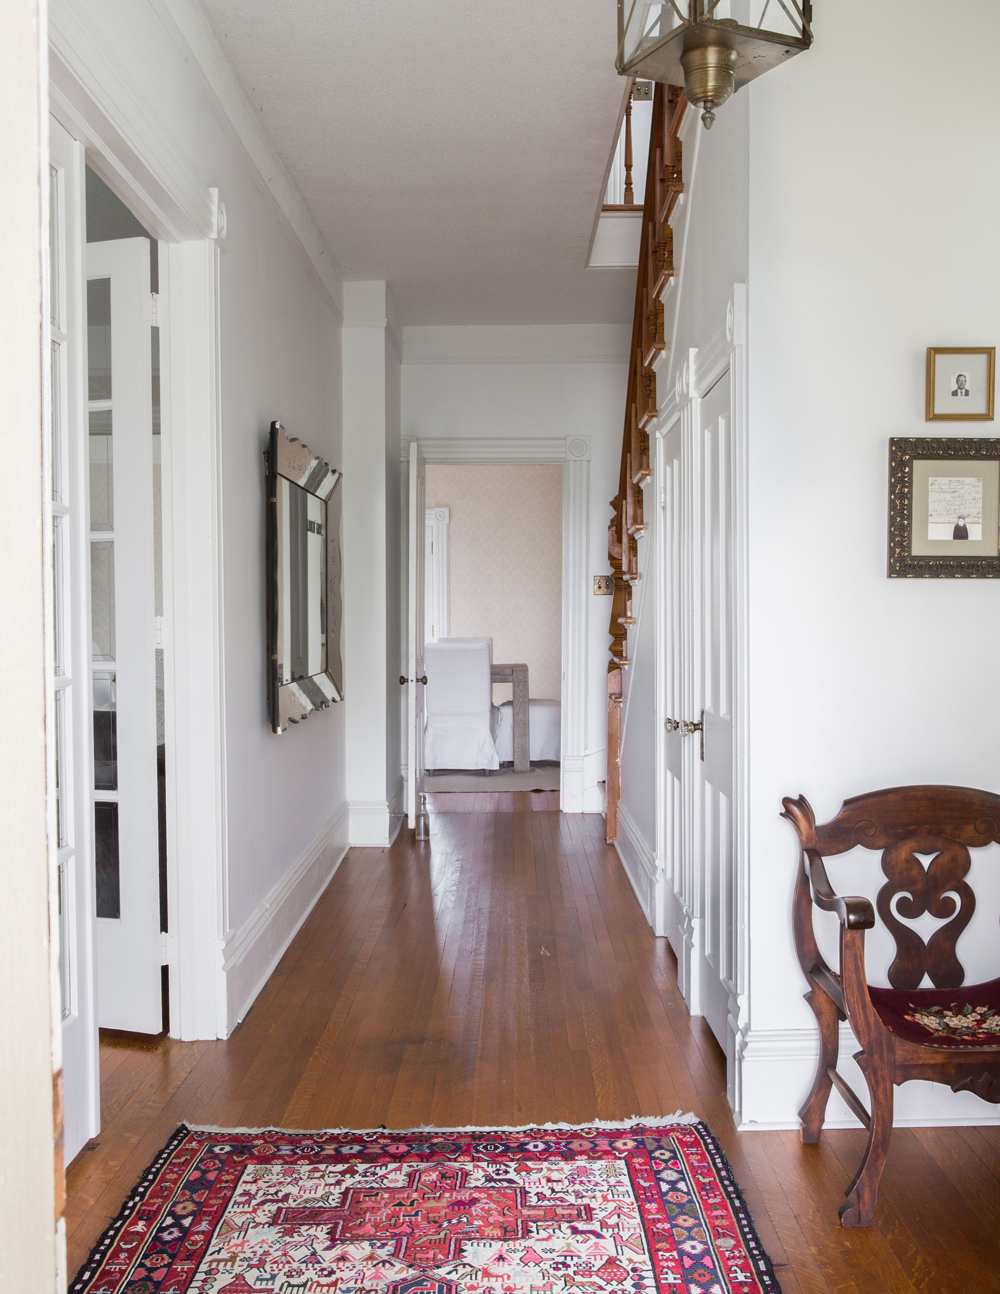 Entryway to a house built in 1903 with hardwood flooring and patterned area rug